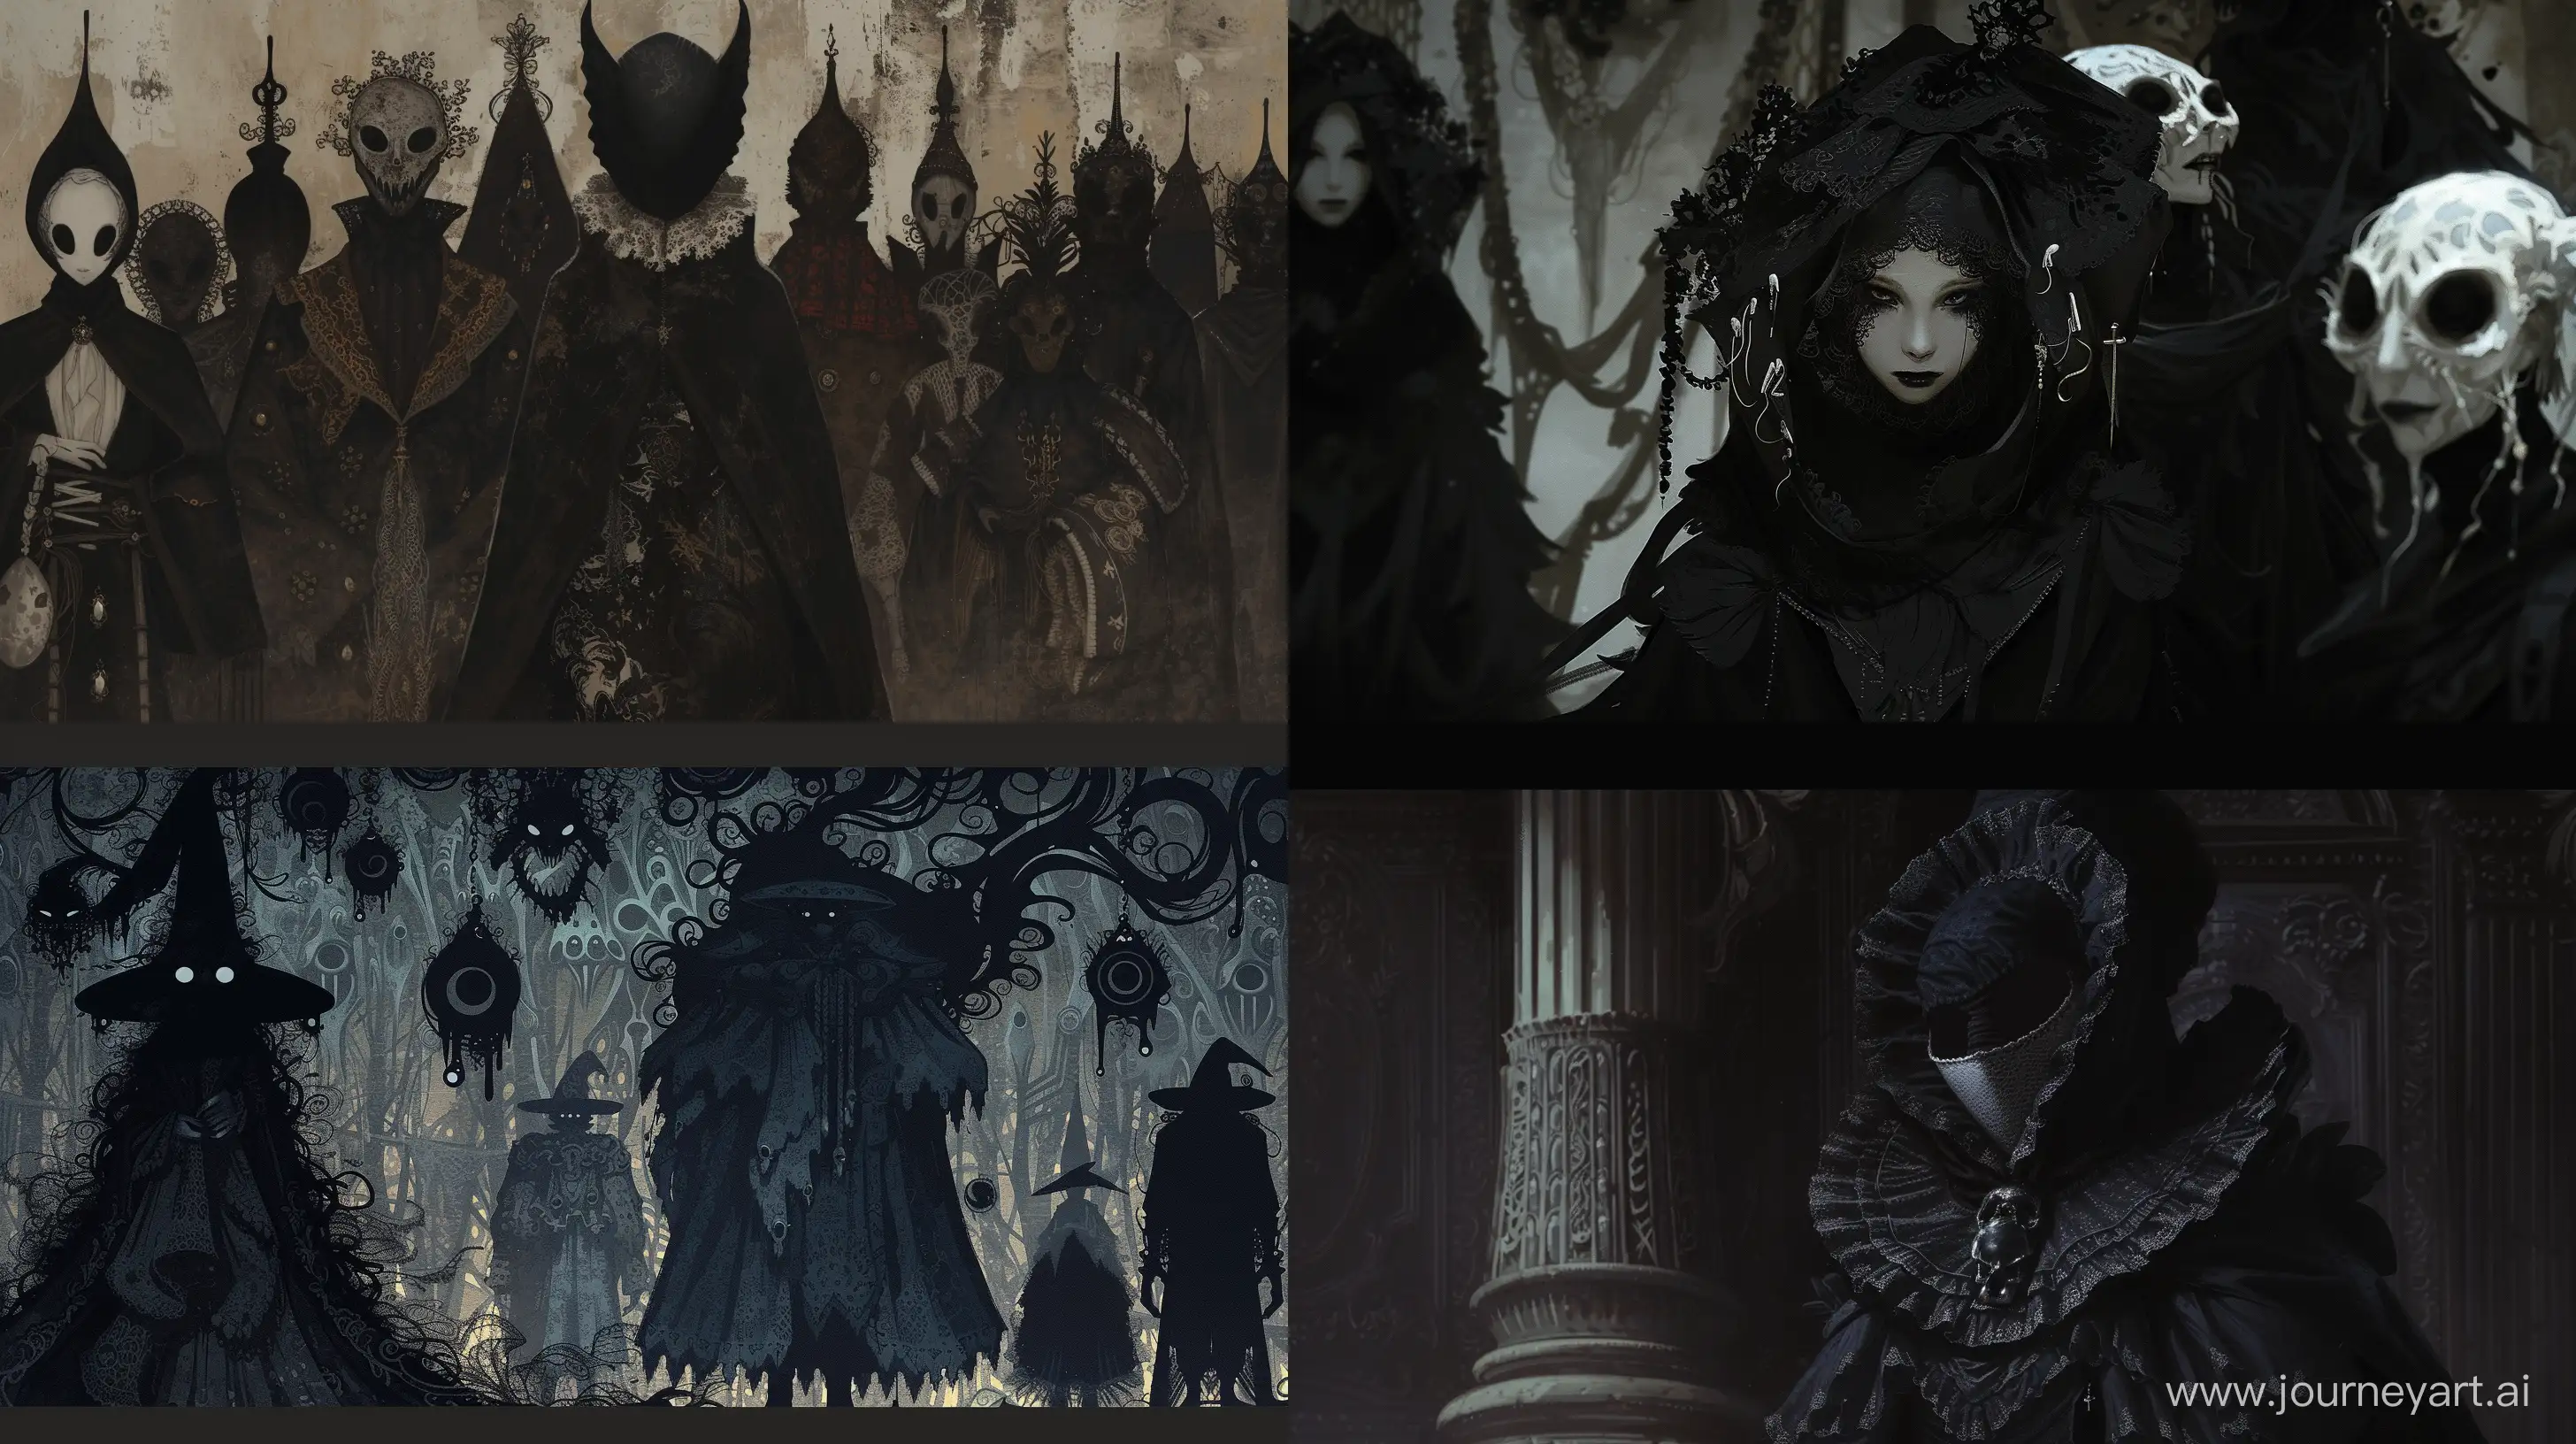 Intriguing-Illustrations-Mysterious-Characters-in-Shadows-by-Tetsuya-Nomura